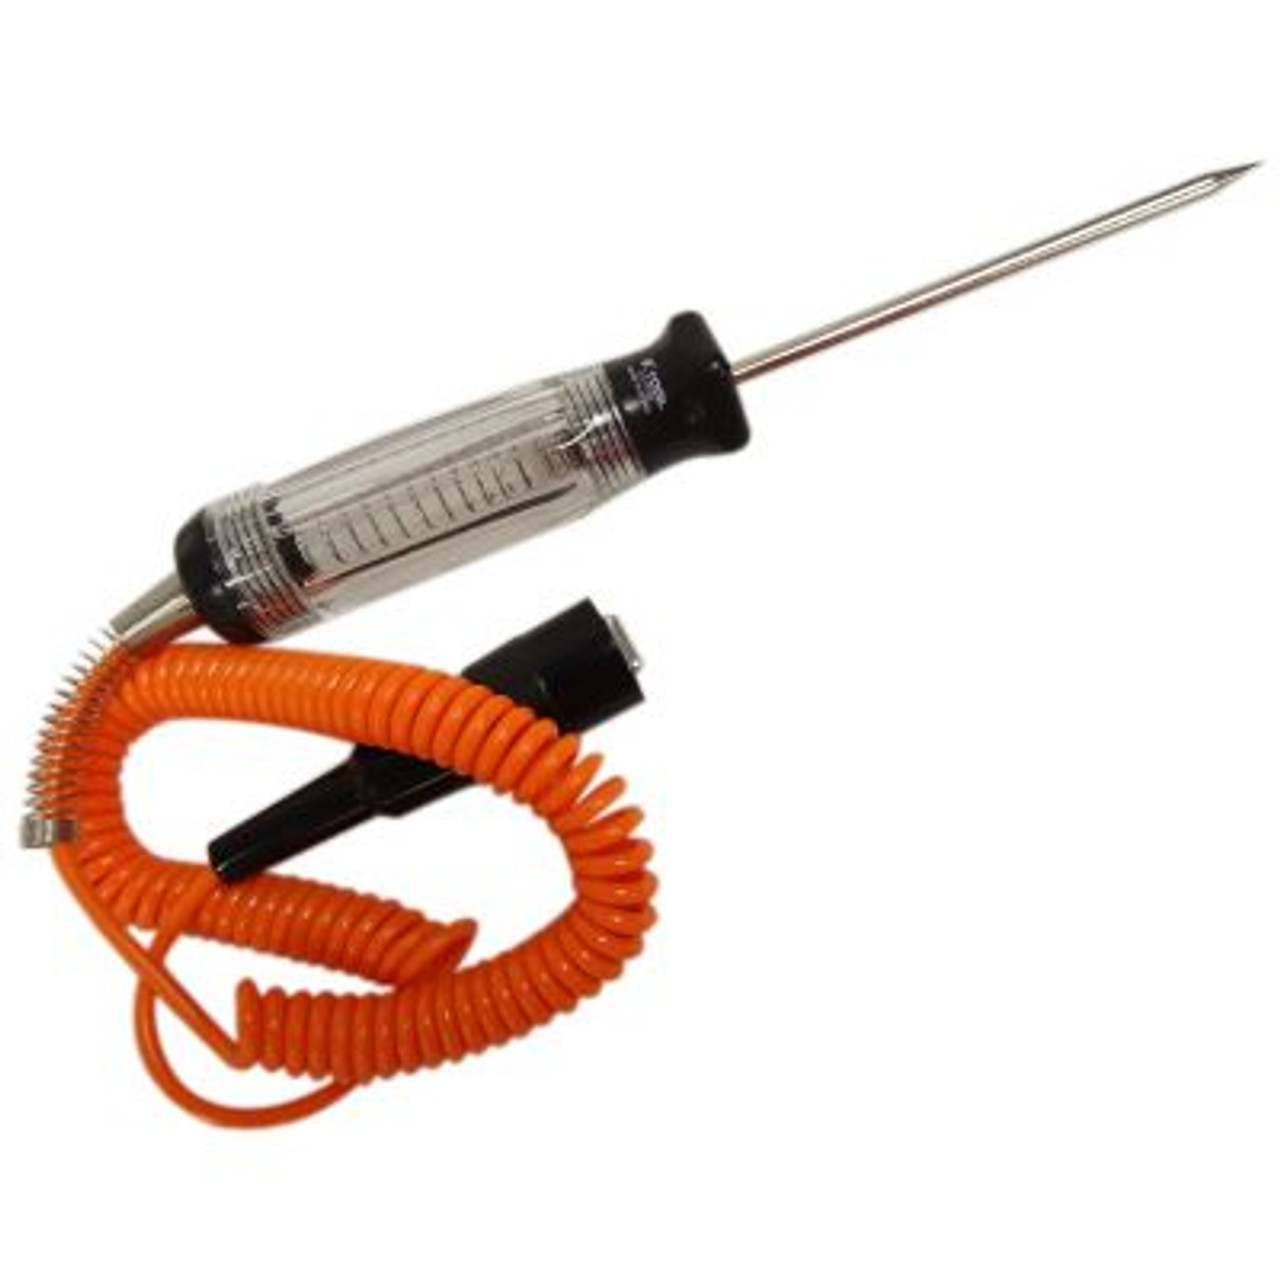 Heavy-duty Circuit Tester with 10 Retractable Wire and Clip